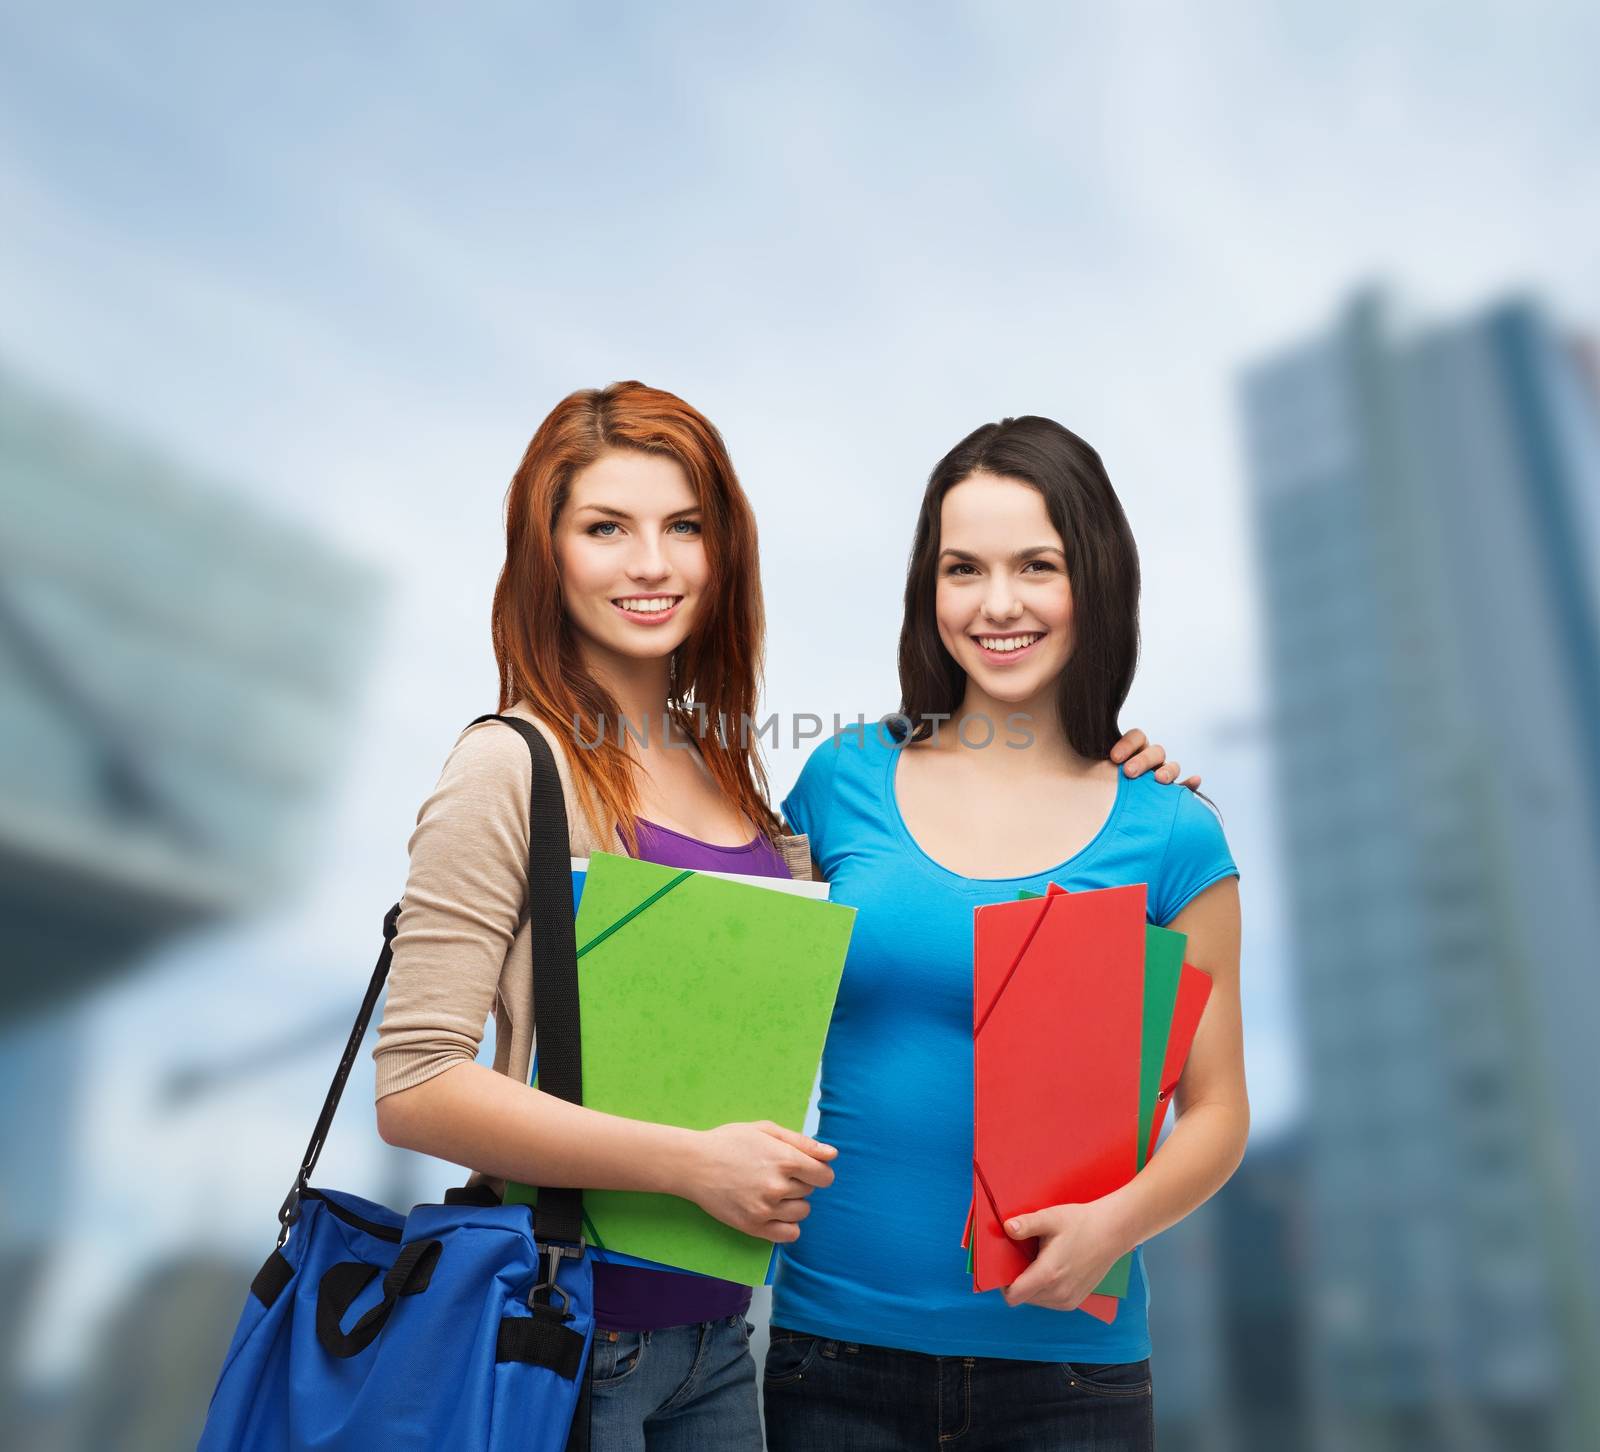 education and people concept - two smiling students with bag and folders standing